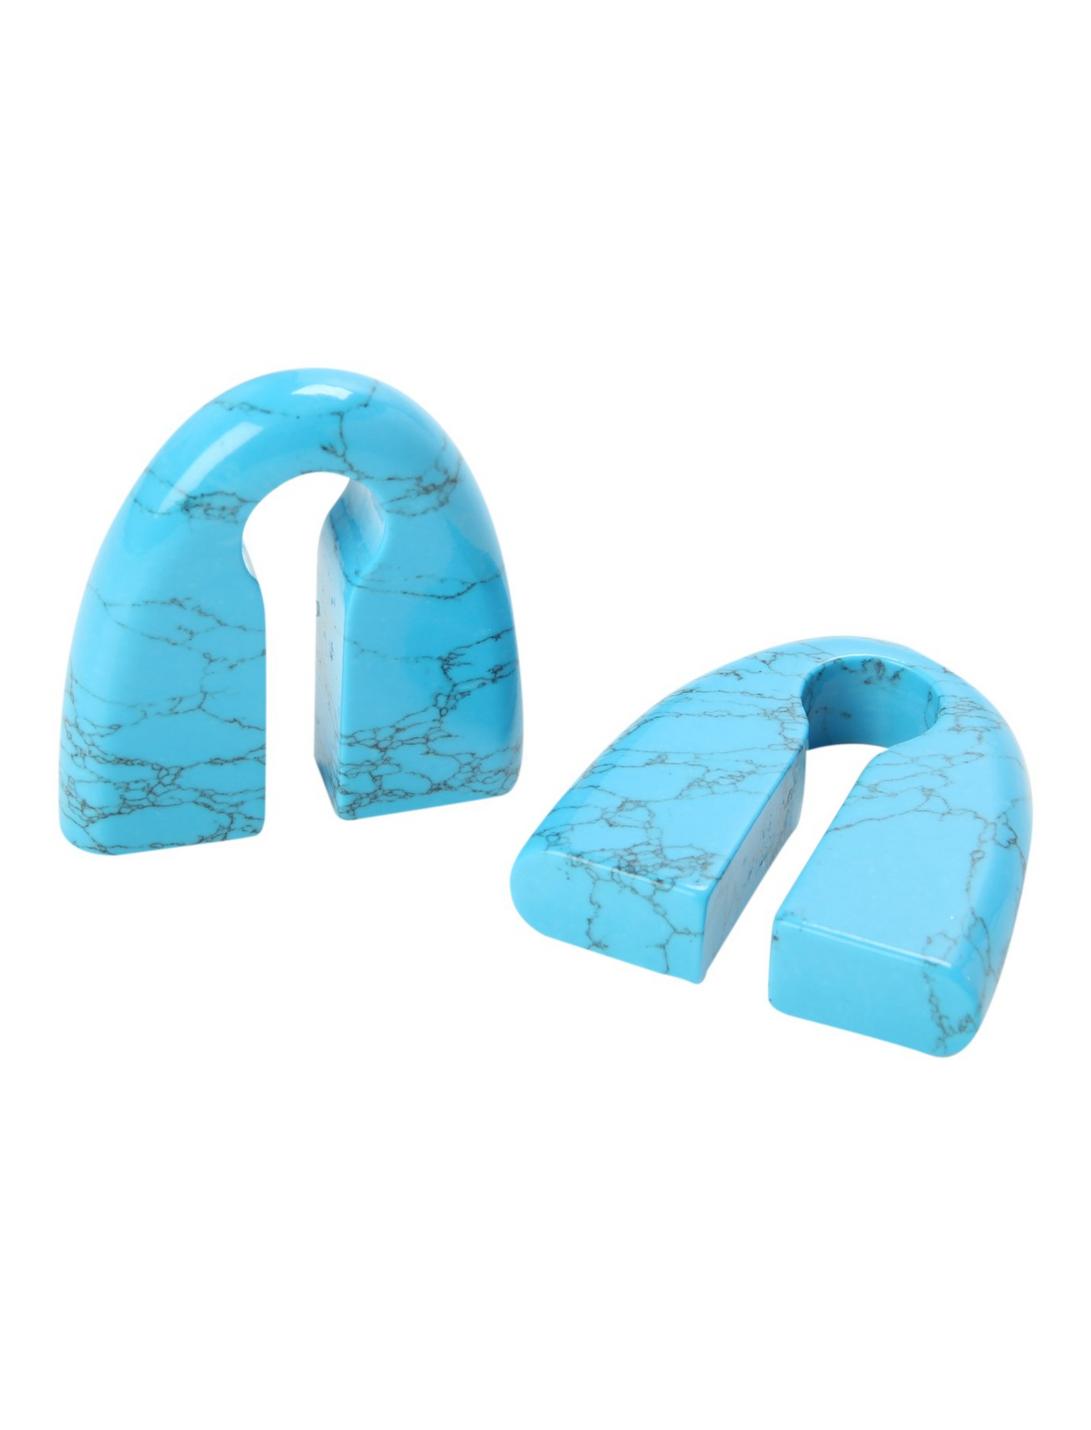 Liquid Glass Stone Turquoise Weight 2 Pack, TURQUOISE, hi-res